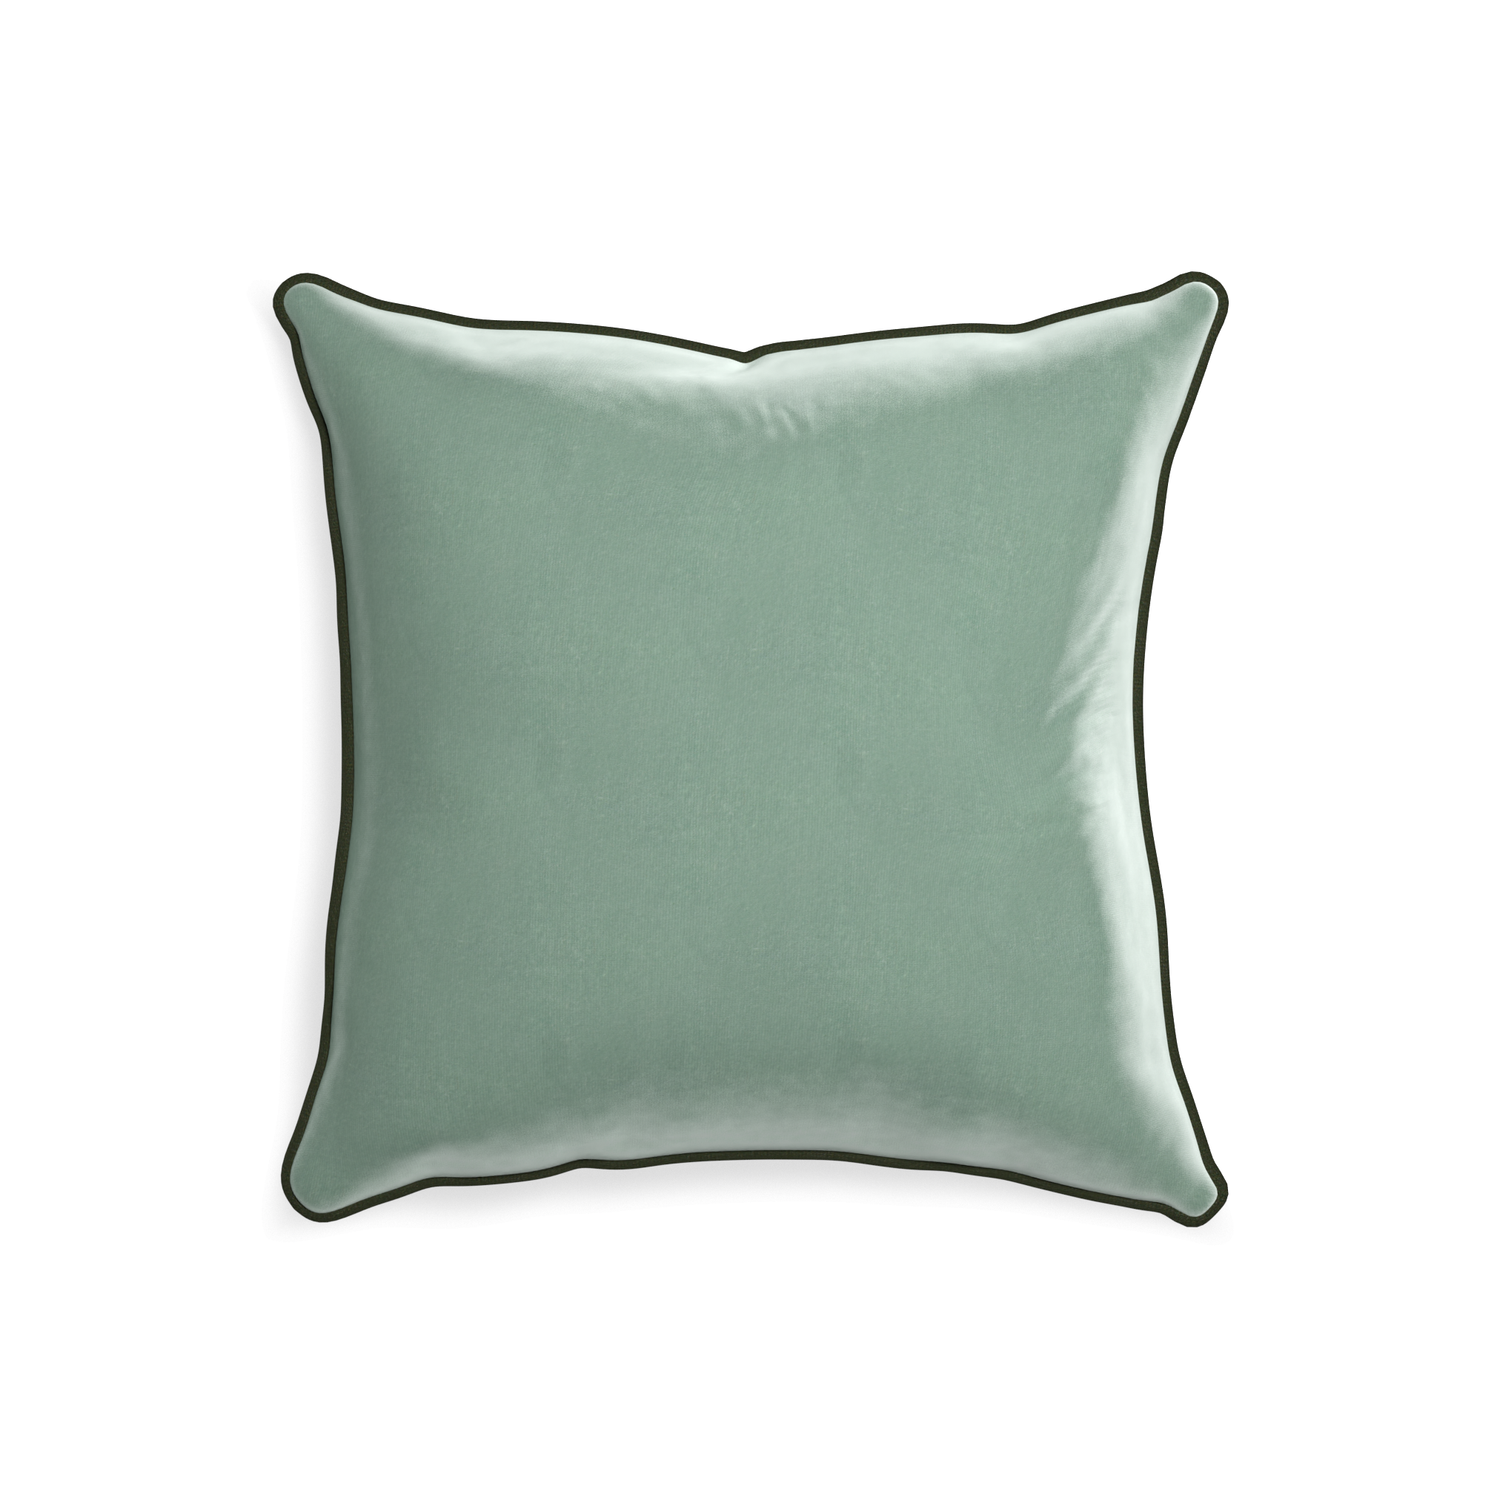 square blue green velvet pillow with fern green piping